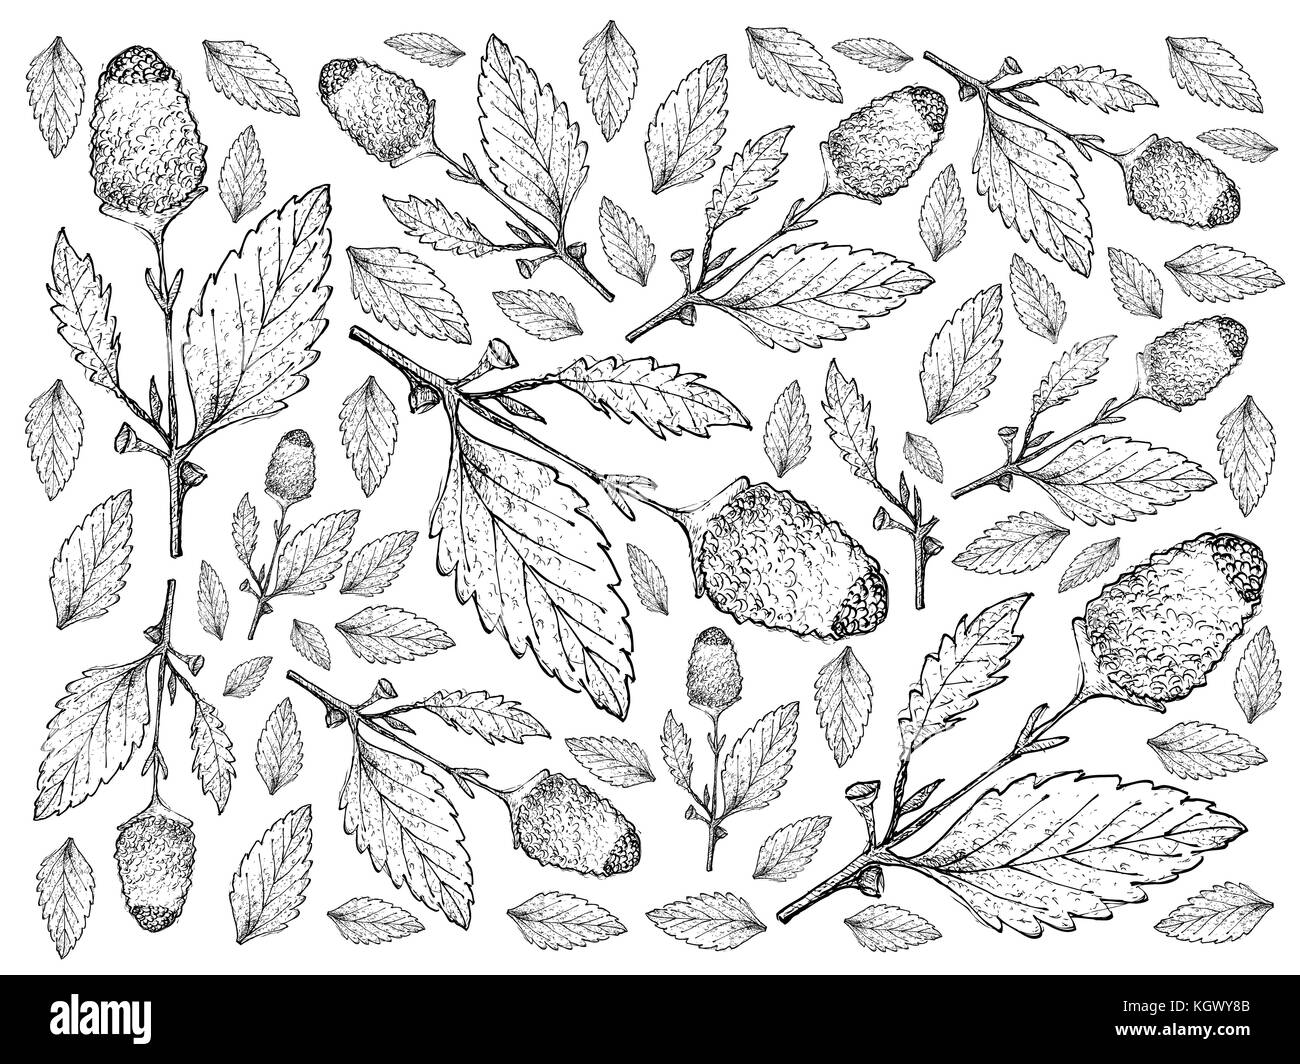 Vegetable and Herb, Illustration Background Pattern of Hand Drawn Sketch Fresh Paracress Plant with Beautiful Yellow Blossom Used for Seasoning in Coo Stock Photo